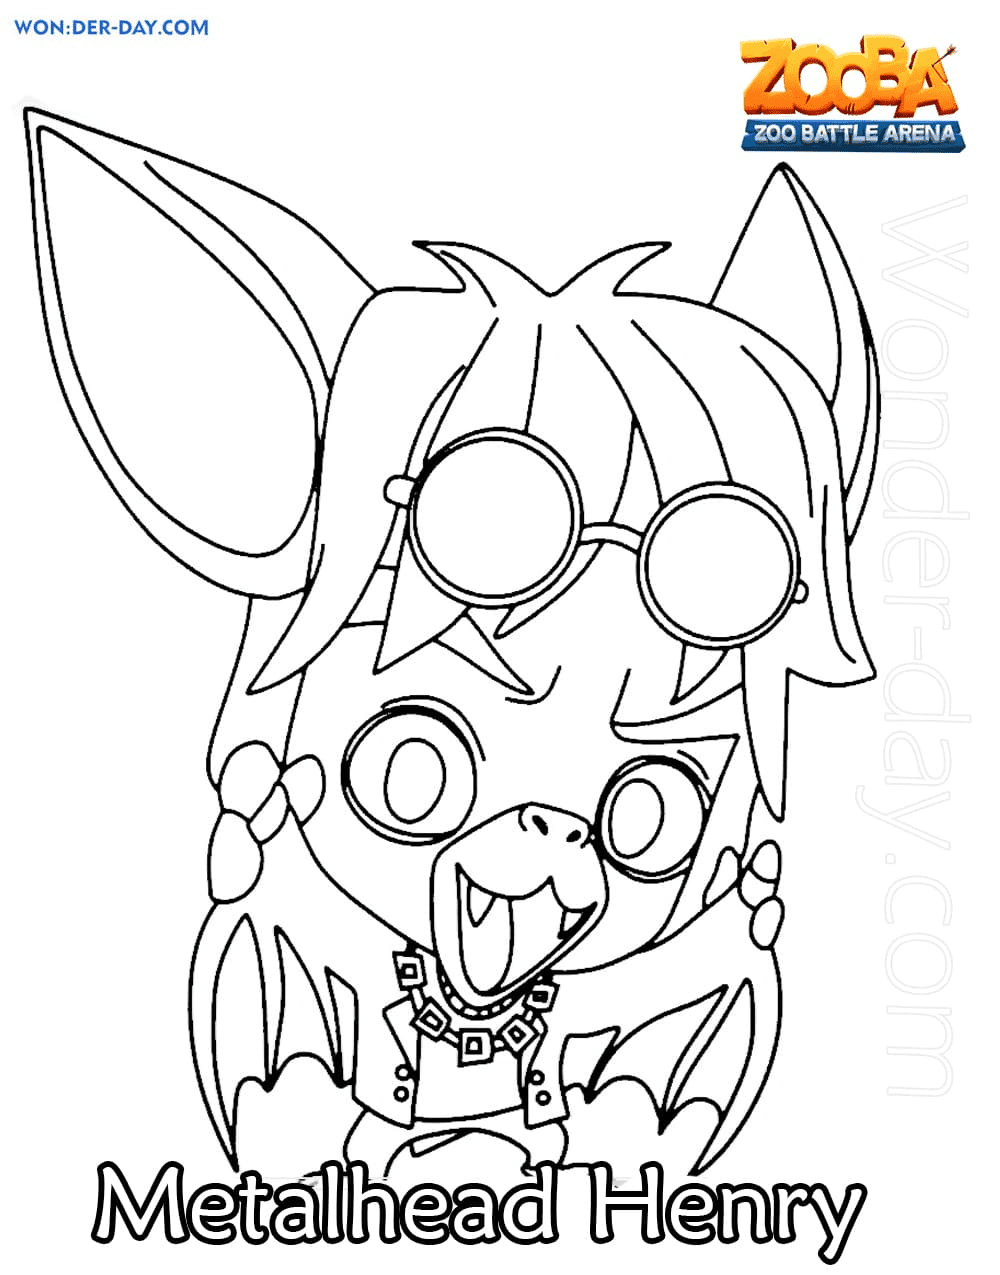 Metalhead Henry Zooba Coloring Pages